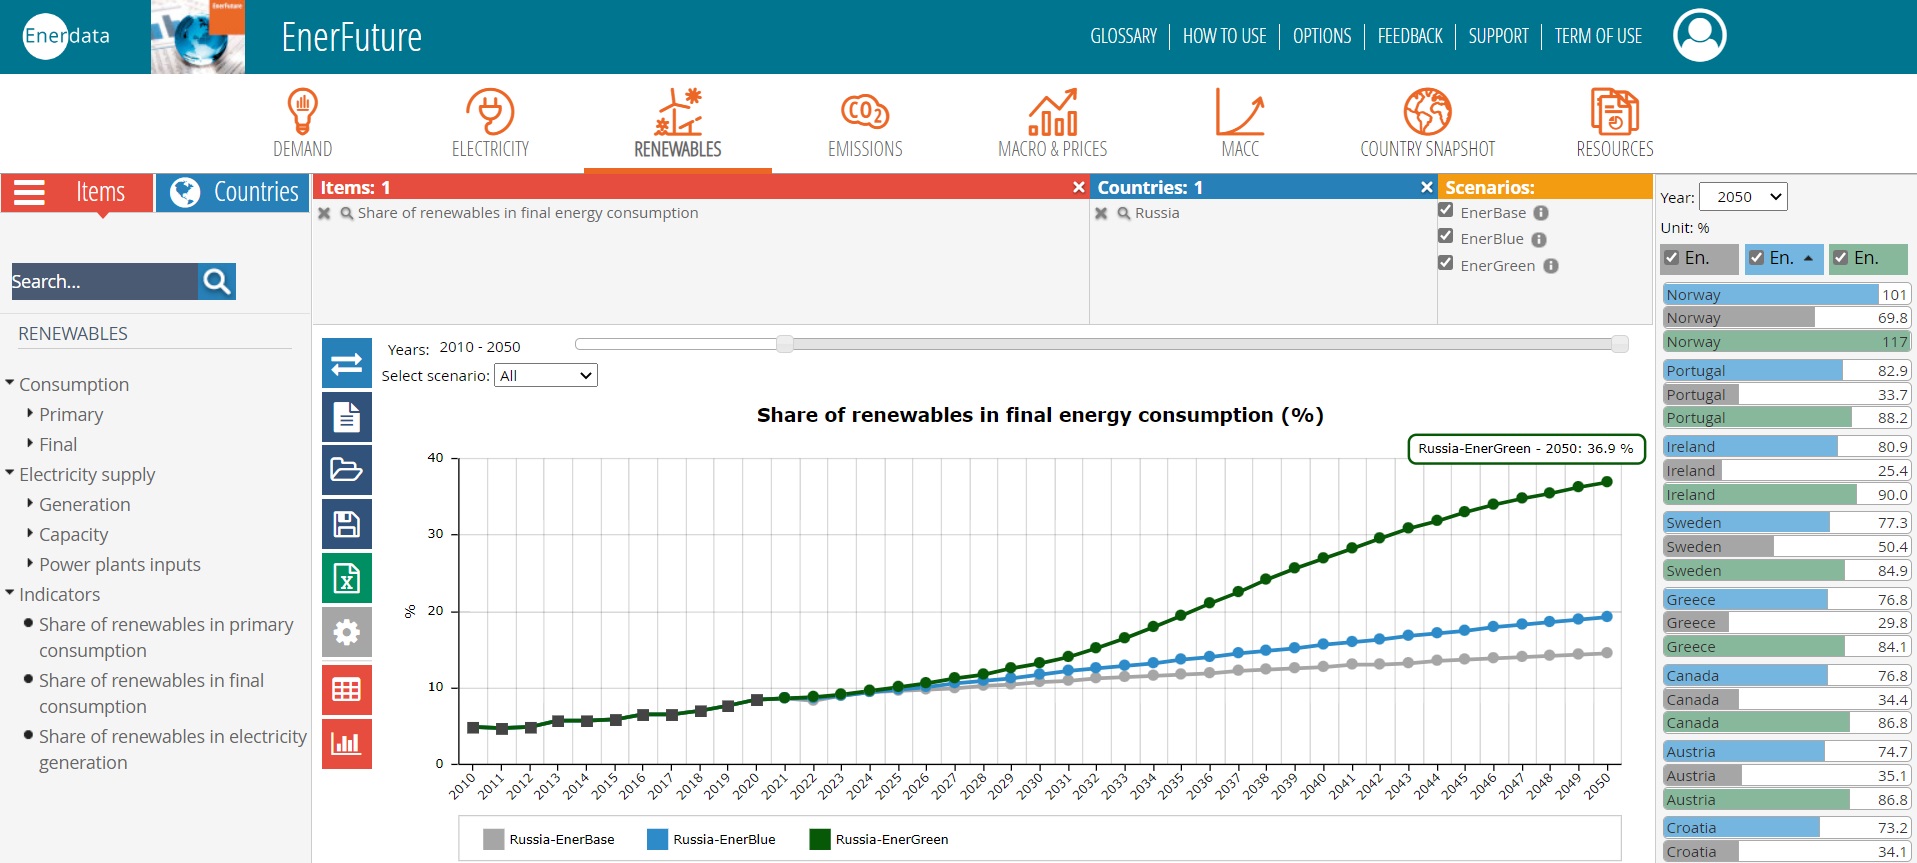 Share of renewables in final consumption